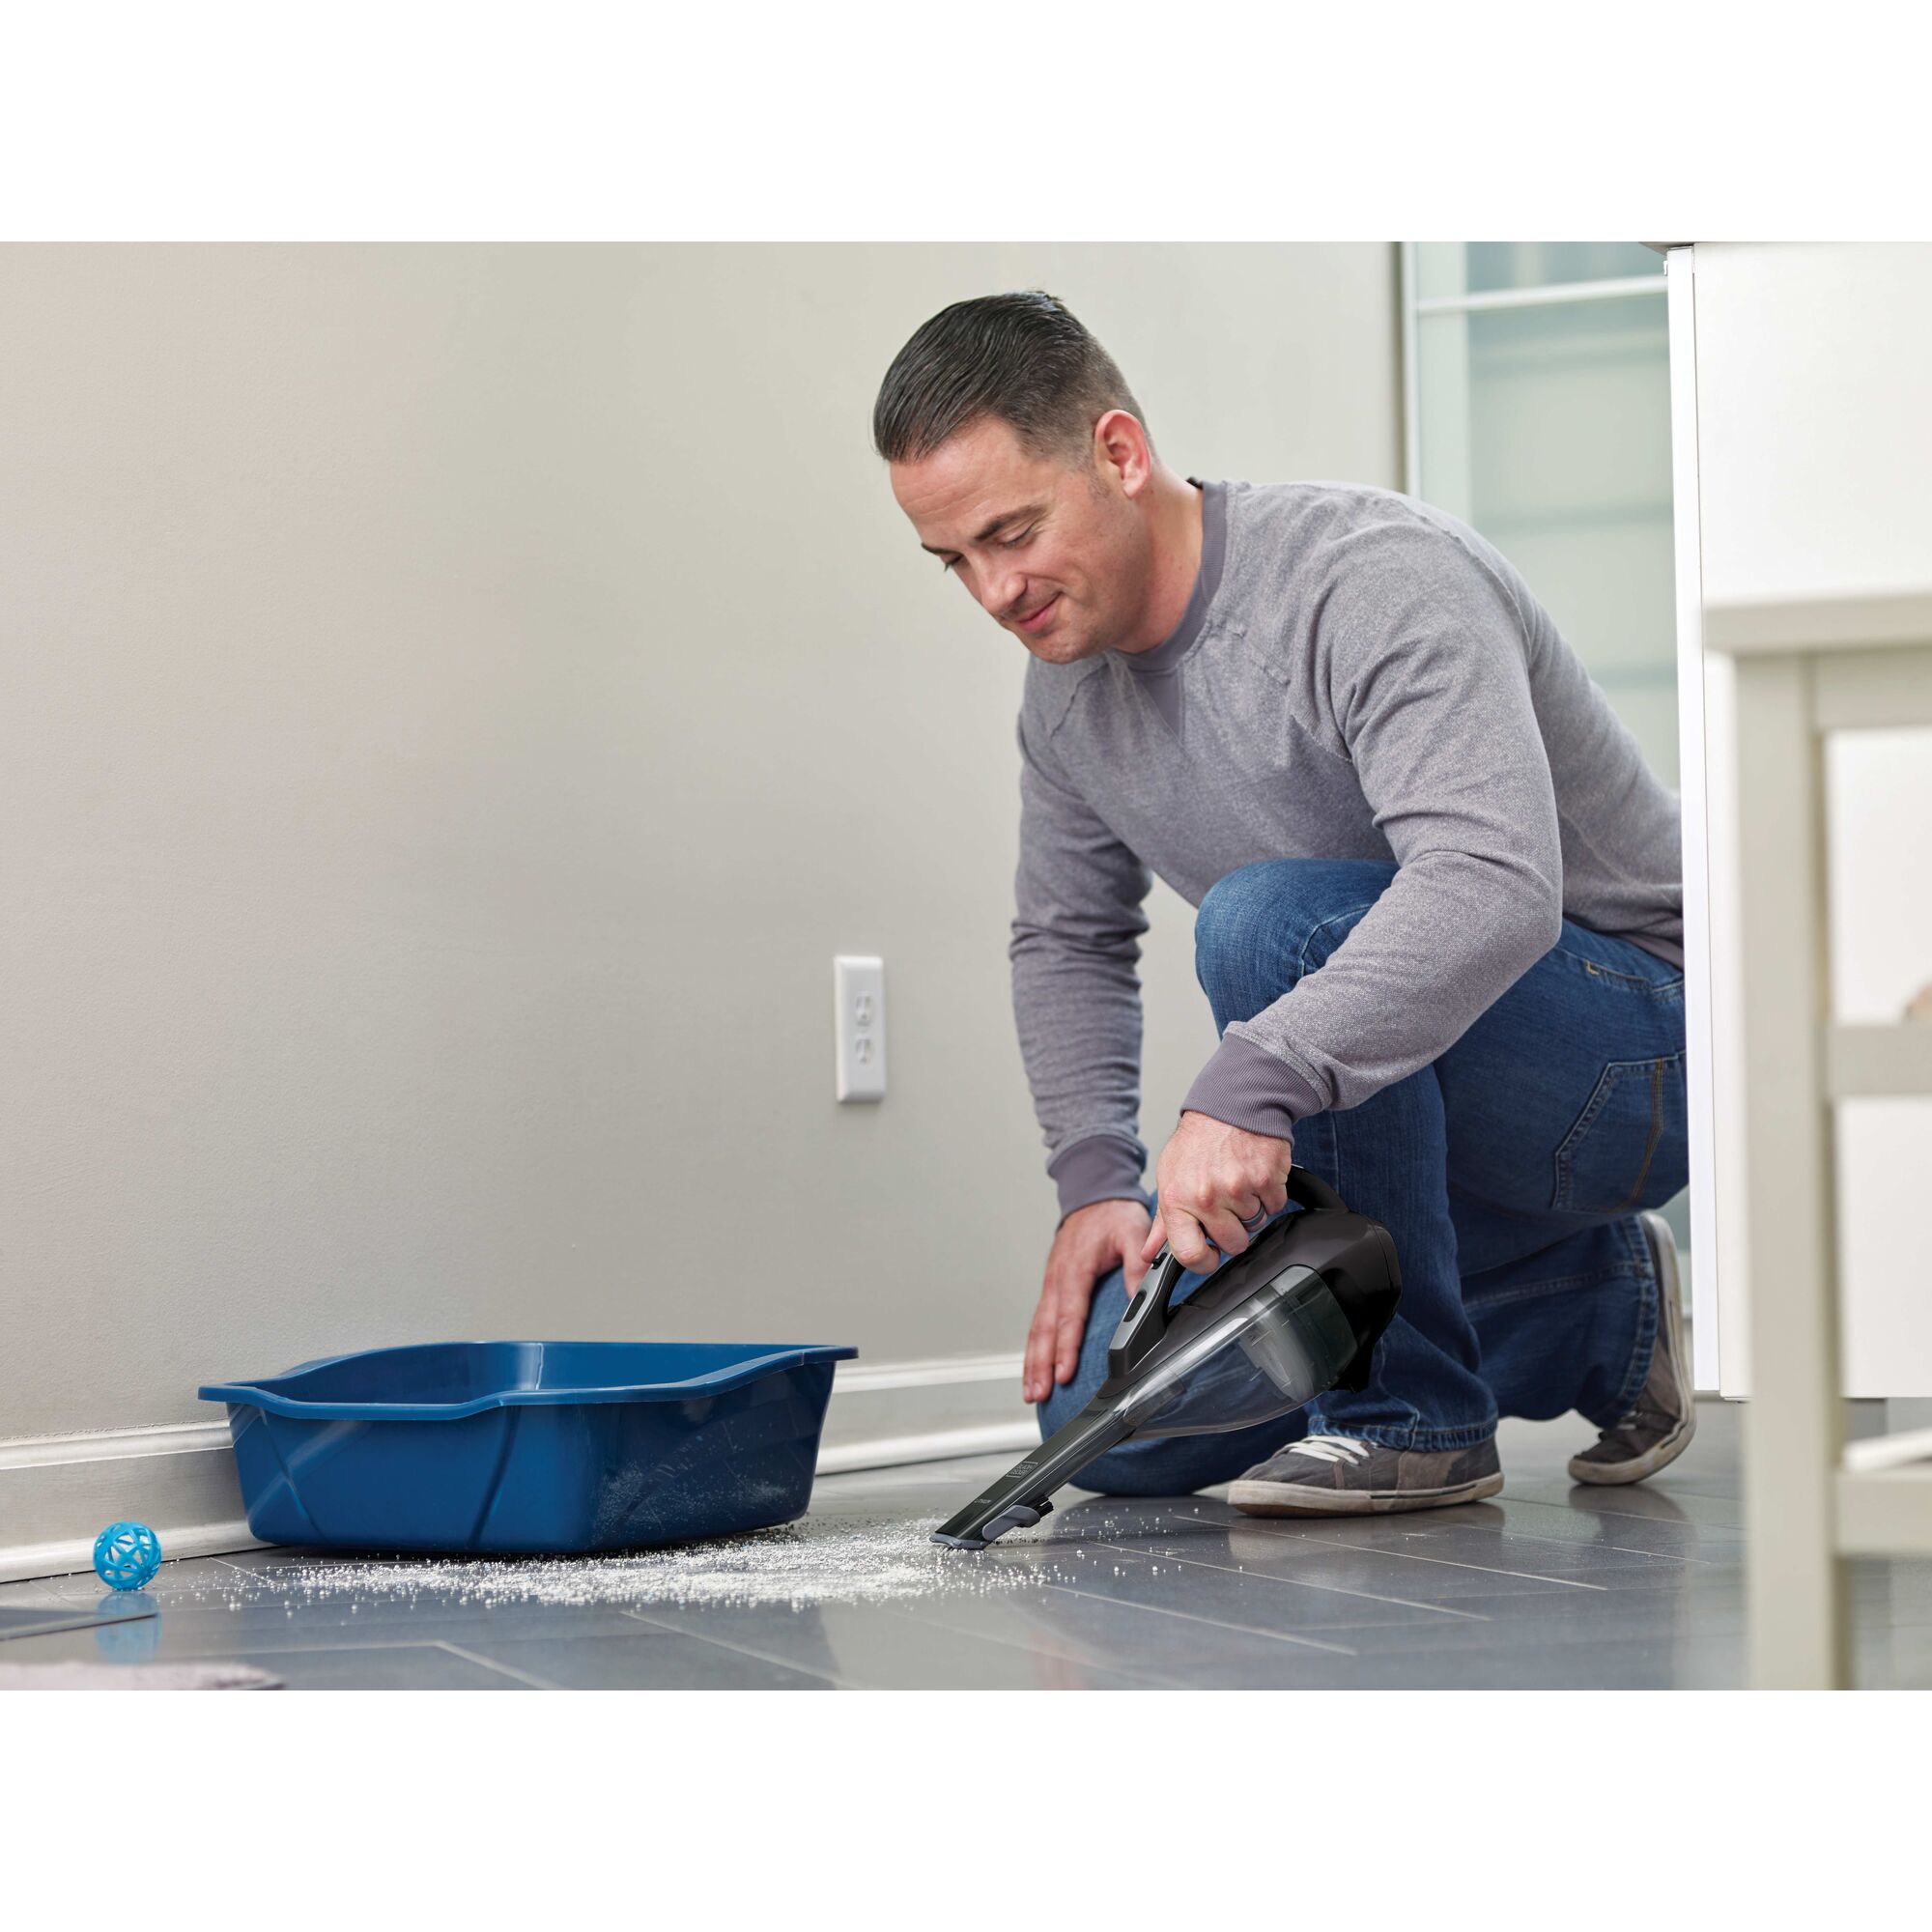 Man using dustbuster handheld vacuum to clean dirt around a blue pail